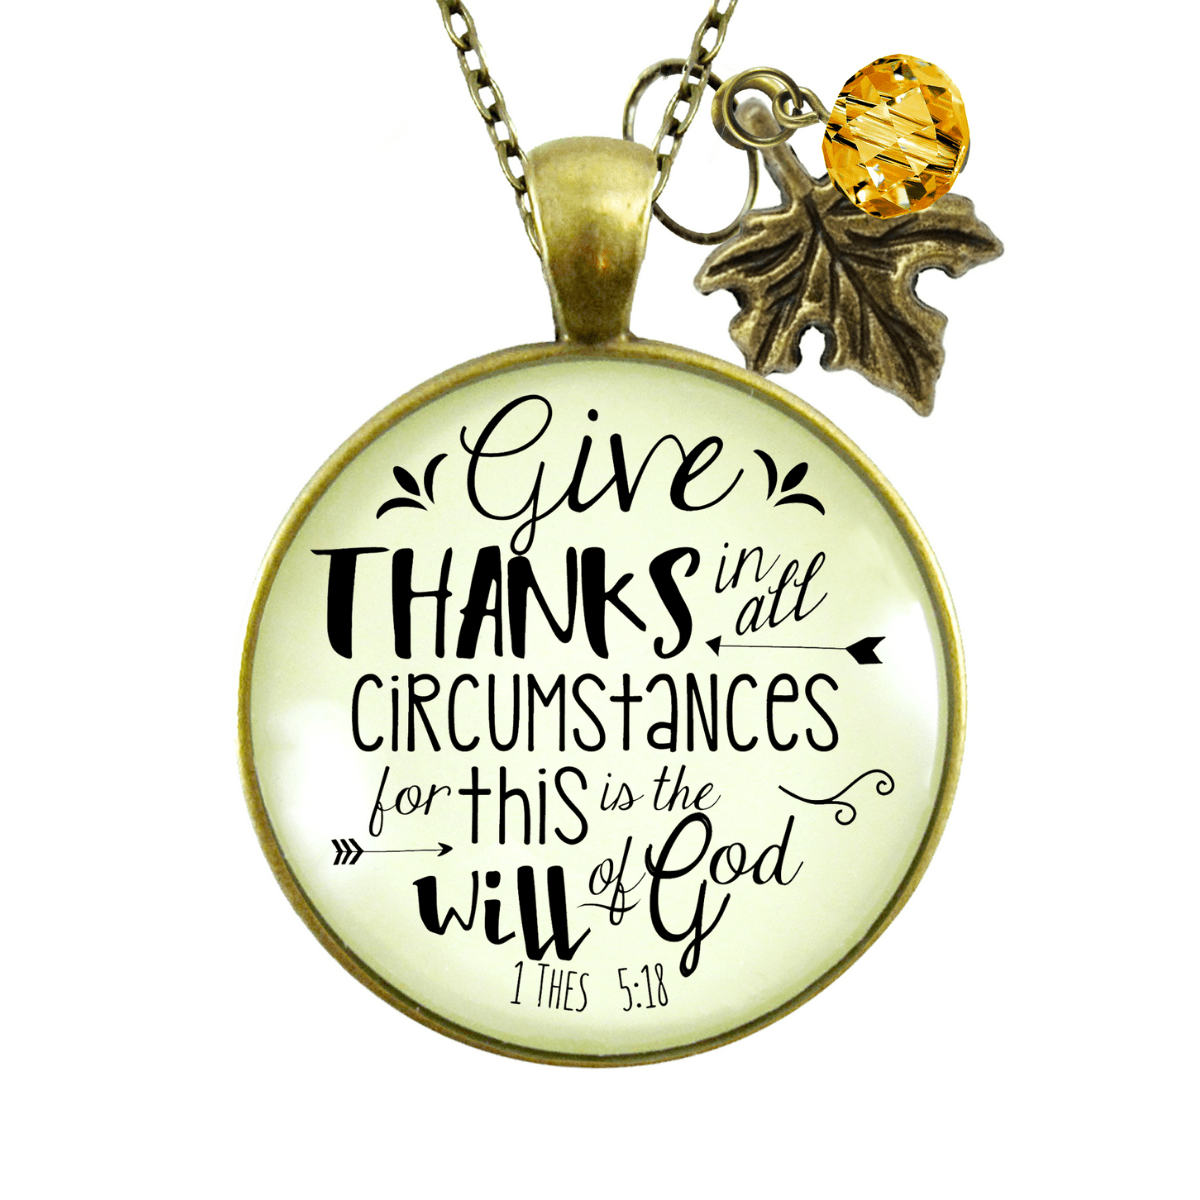 Gutsy Goodness Autumn Necklace Give Thanks In All Circumstances Faith Inspired Jewelry - Gutsy Goodness Handmade Jewelry;Autumn Necklace Give Thanks In All Circumstances Faith Inspired Jewelry - Gutsy Goodness Handmade Jewelry Gifts